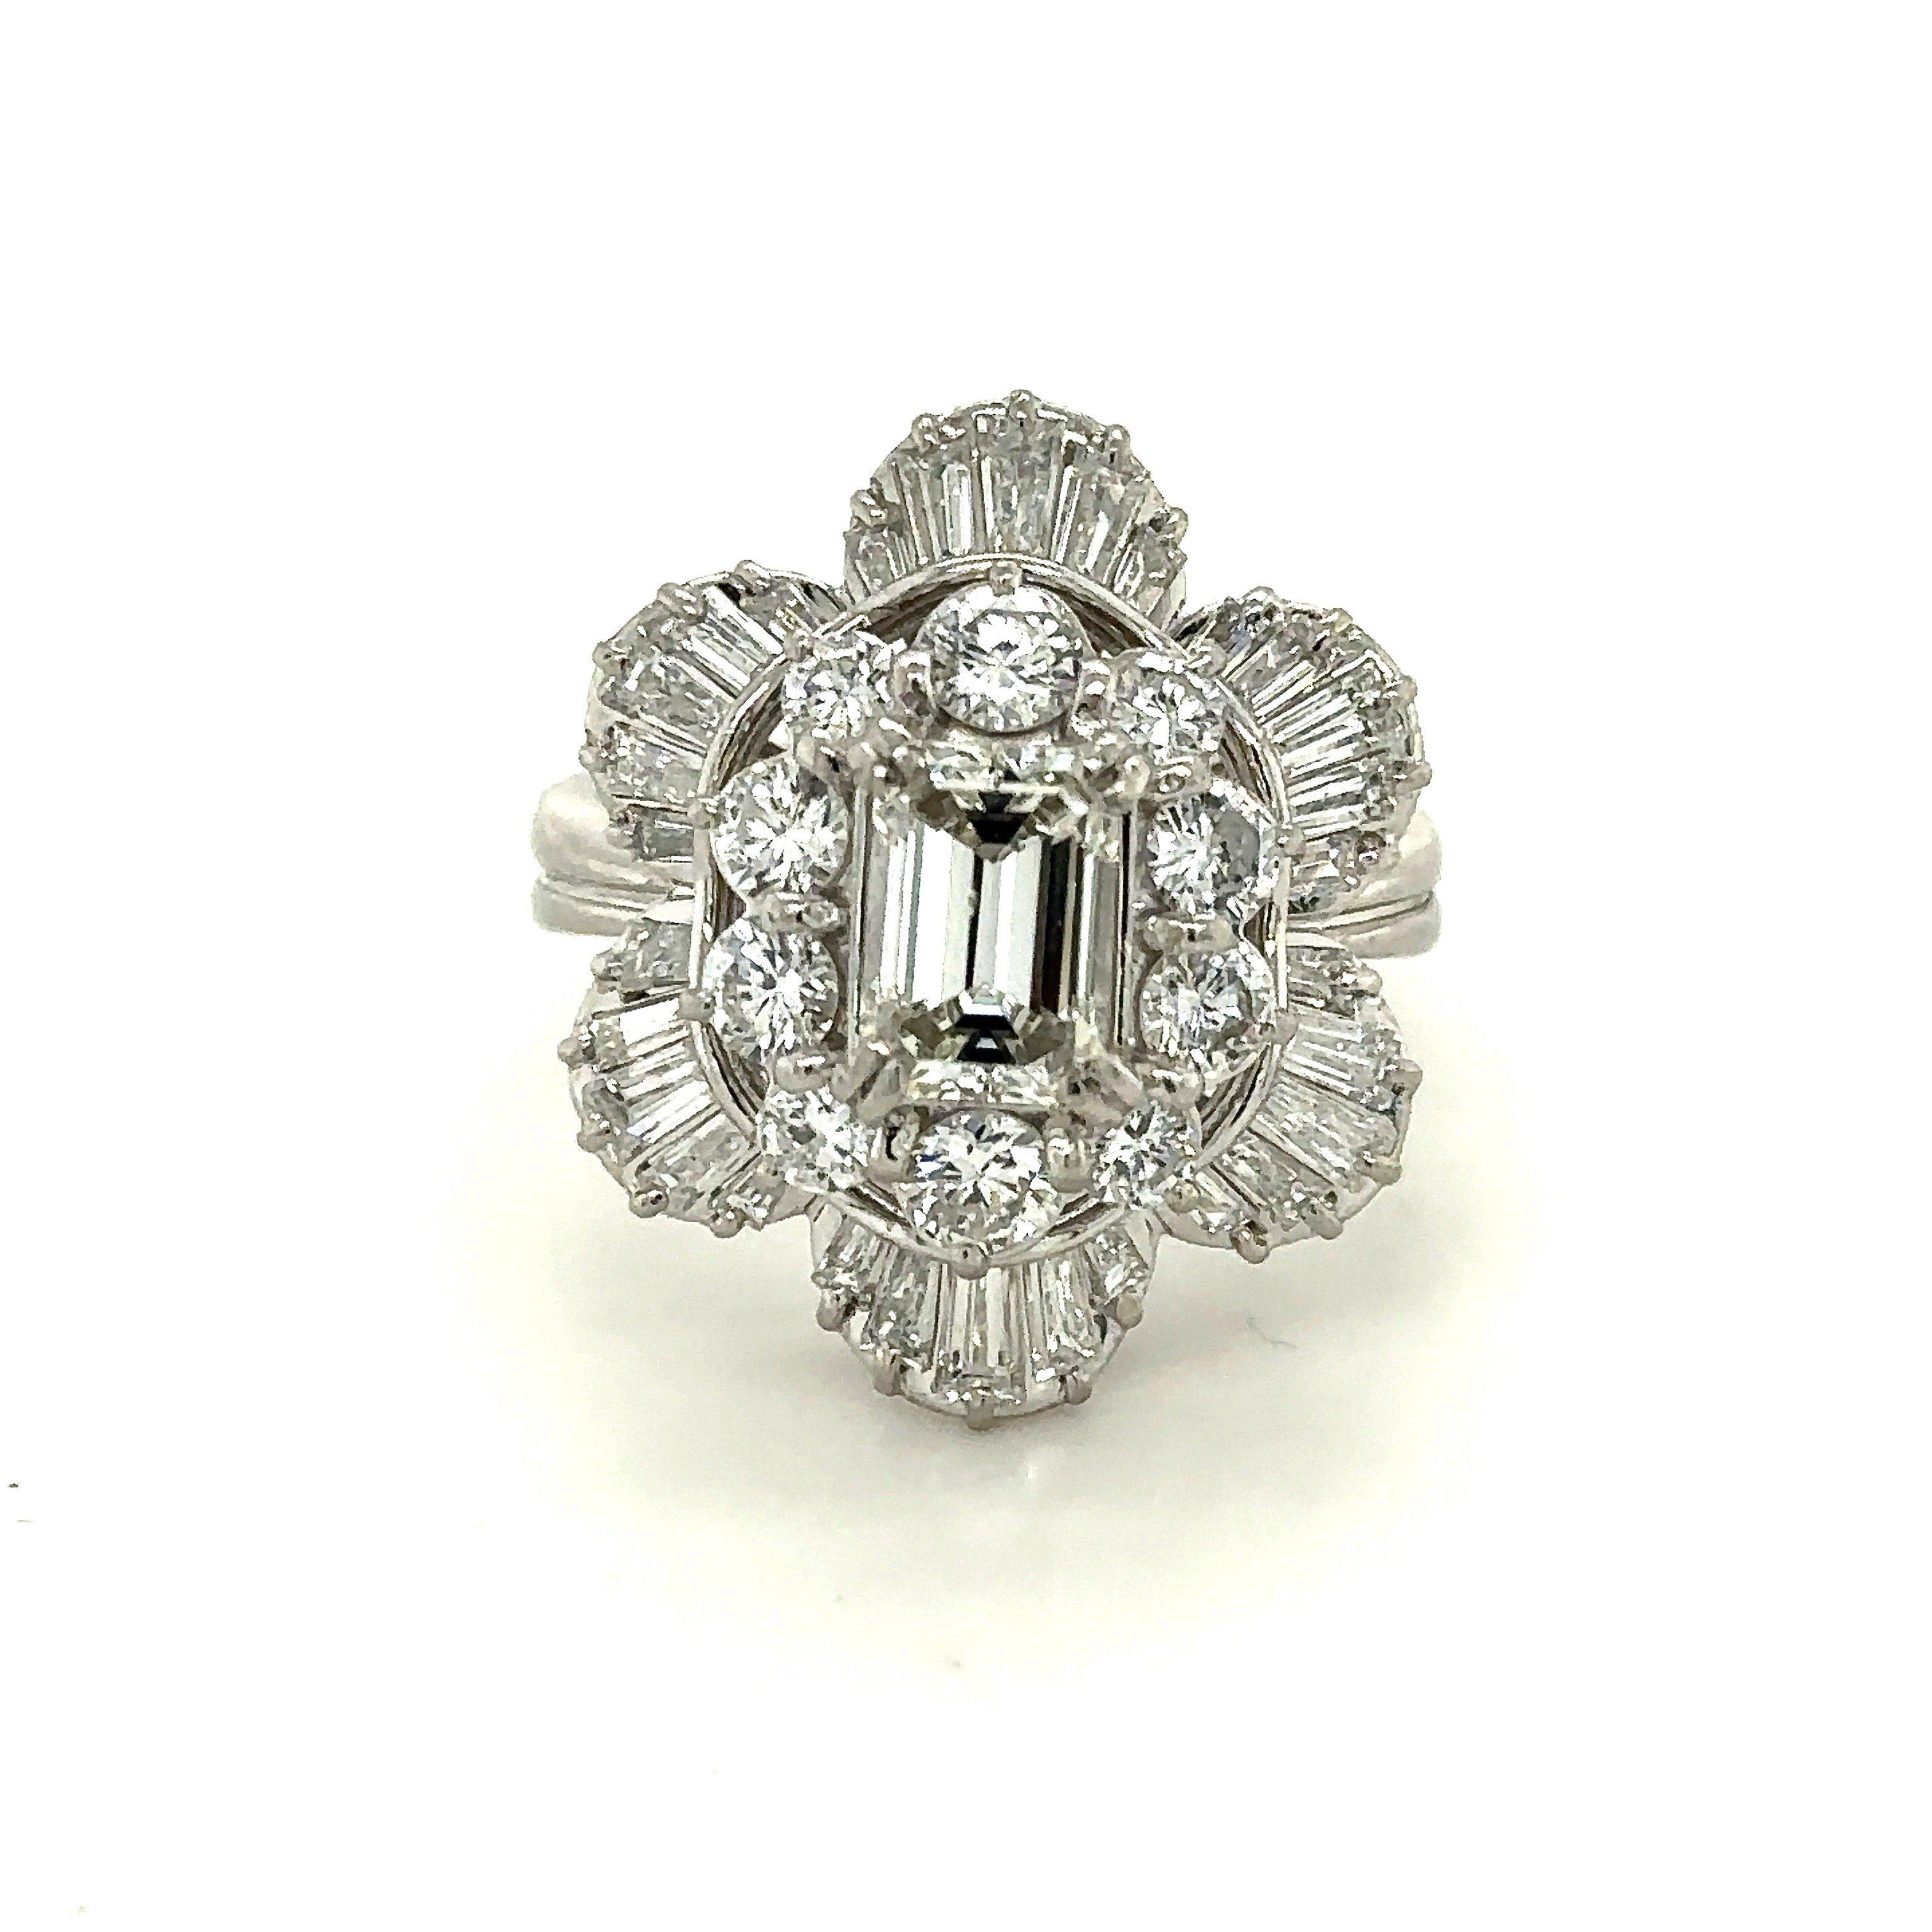 Vintage Platinum 3CT diamond floral cocktail ring. This 1950s-era vintage platinum and diamond cocktail ring features 3CT diamonds in a floral design. The center diamond is a 1.21CT emerald-cut diamond, J Color, SI2 Clarity with a GIA lab report.